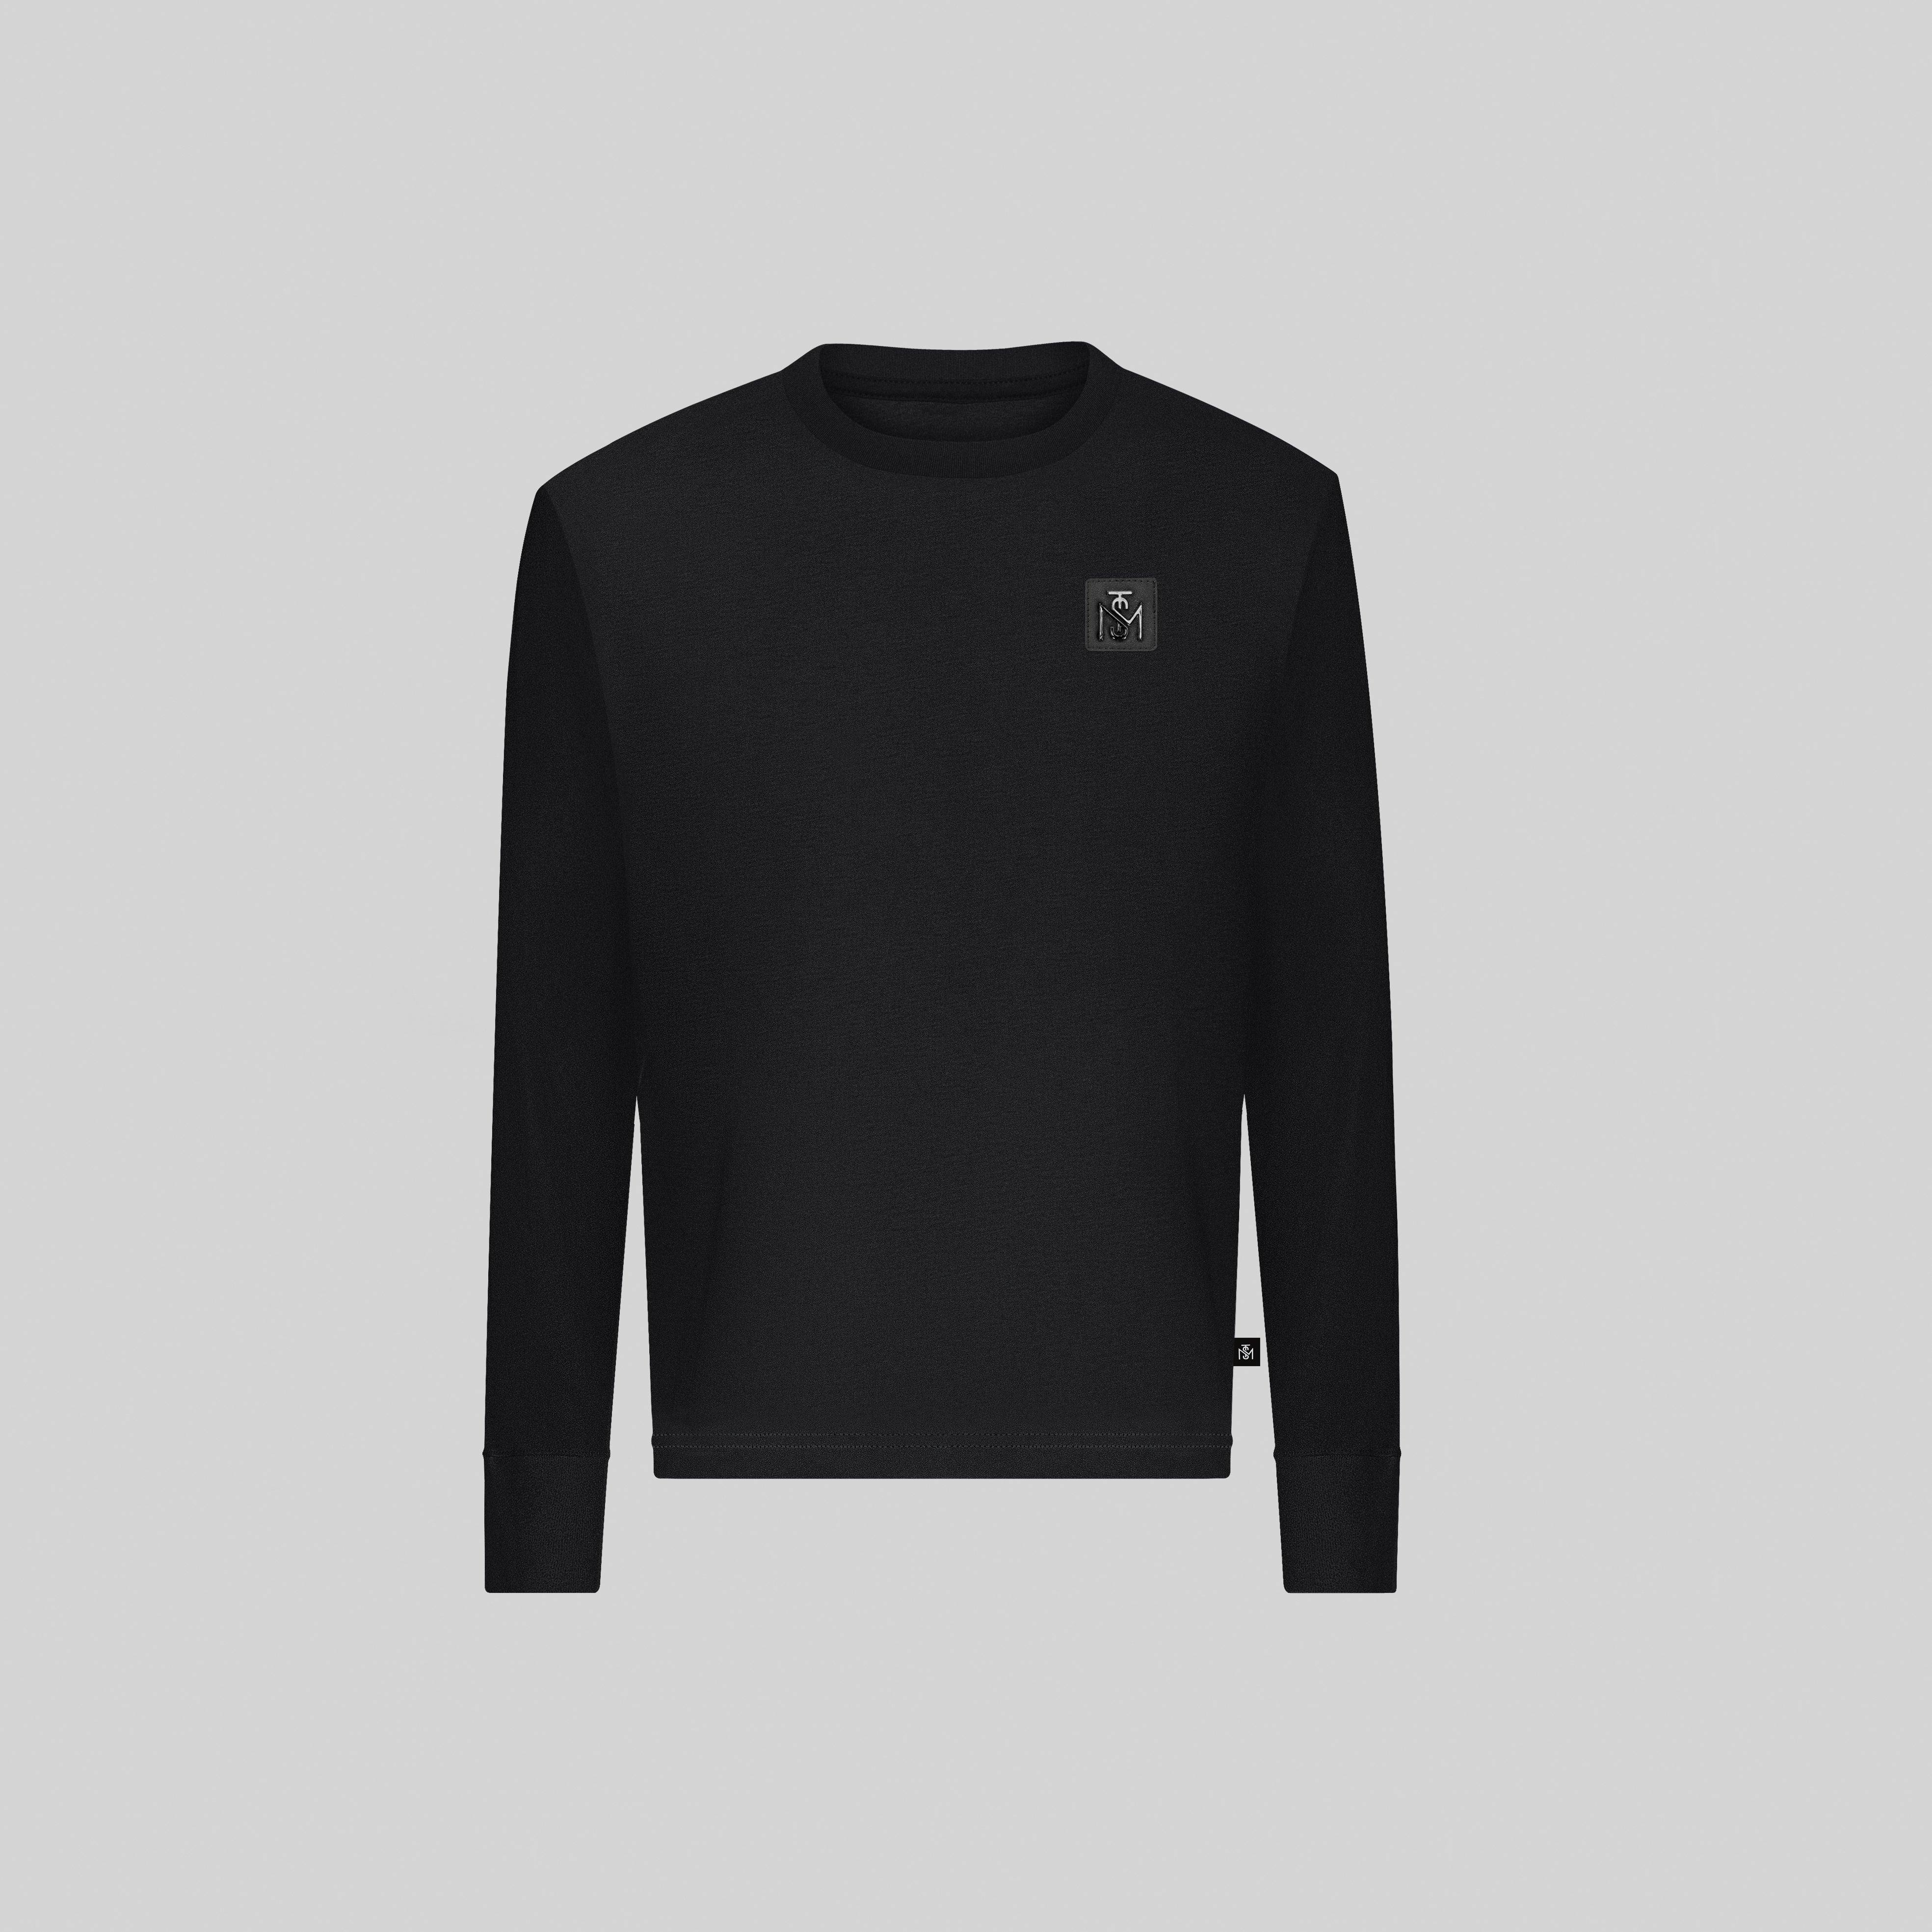 HASEN BLACK LONG SLEEVE | Monastery Couture